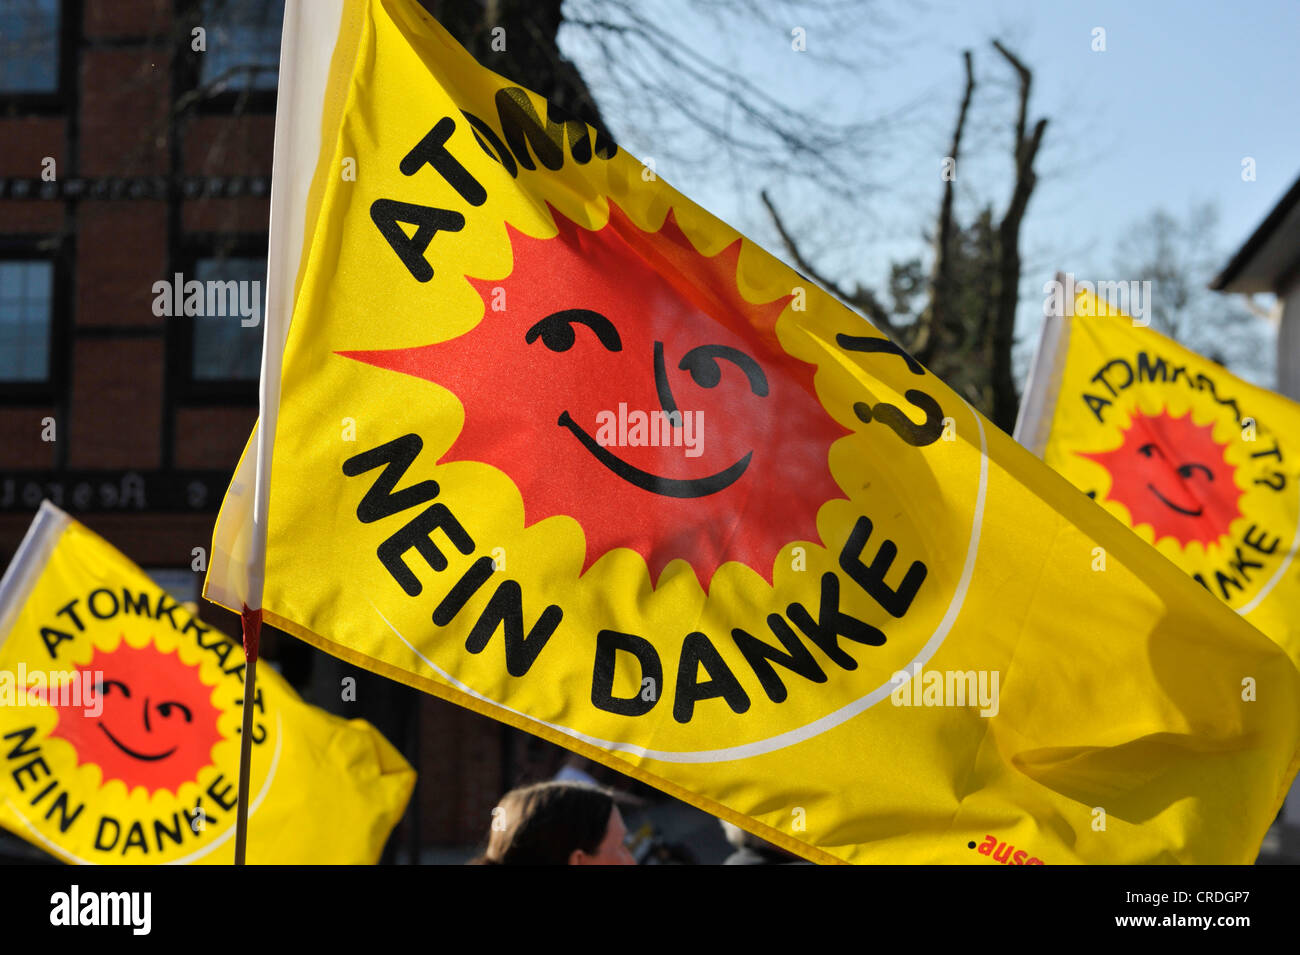 'Atomkraft, Nein Danke', German for 'Nuclear Power, no thanks' Stock Photo